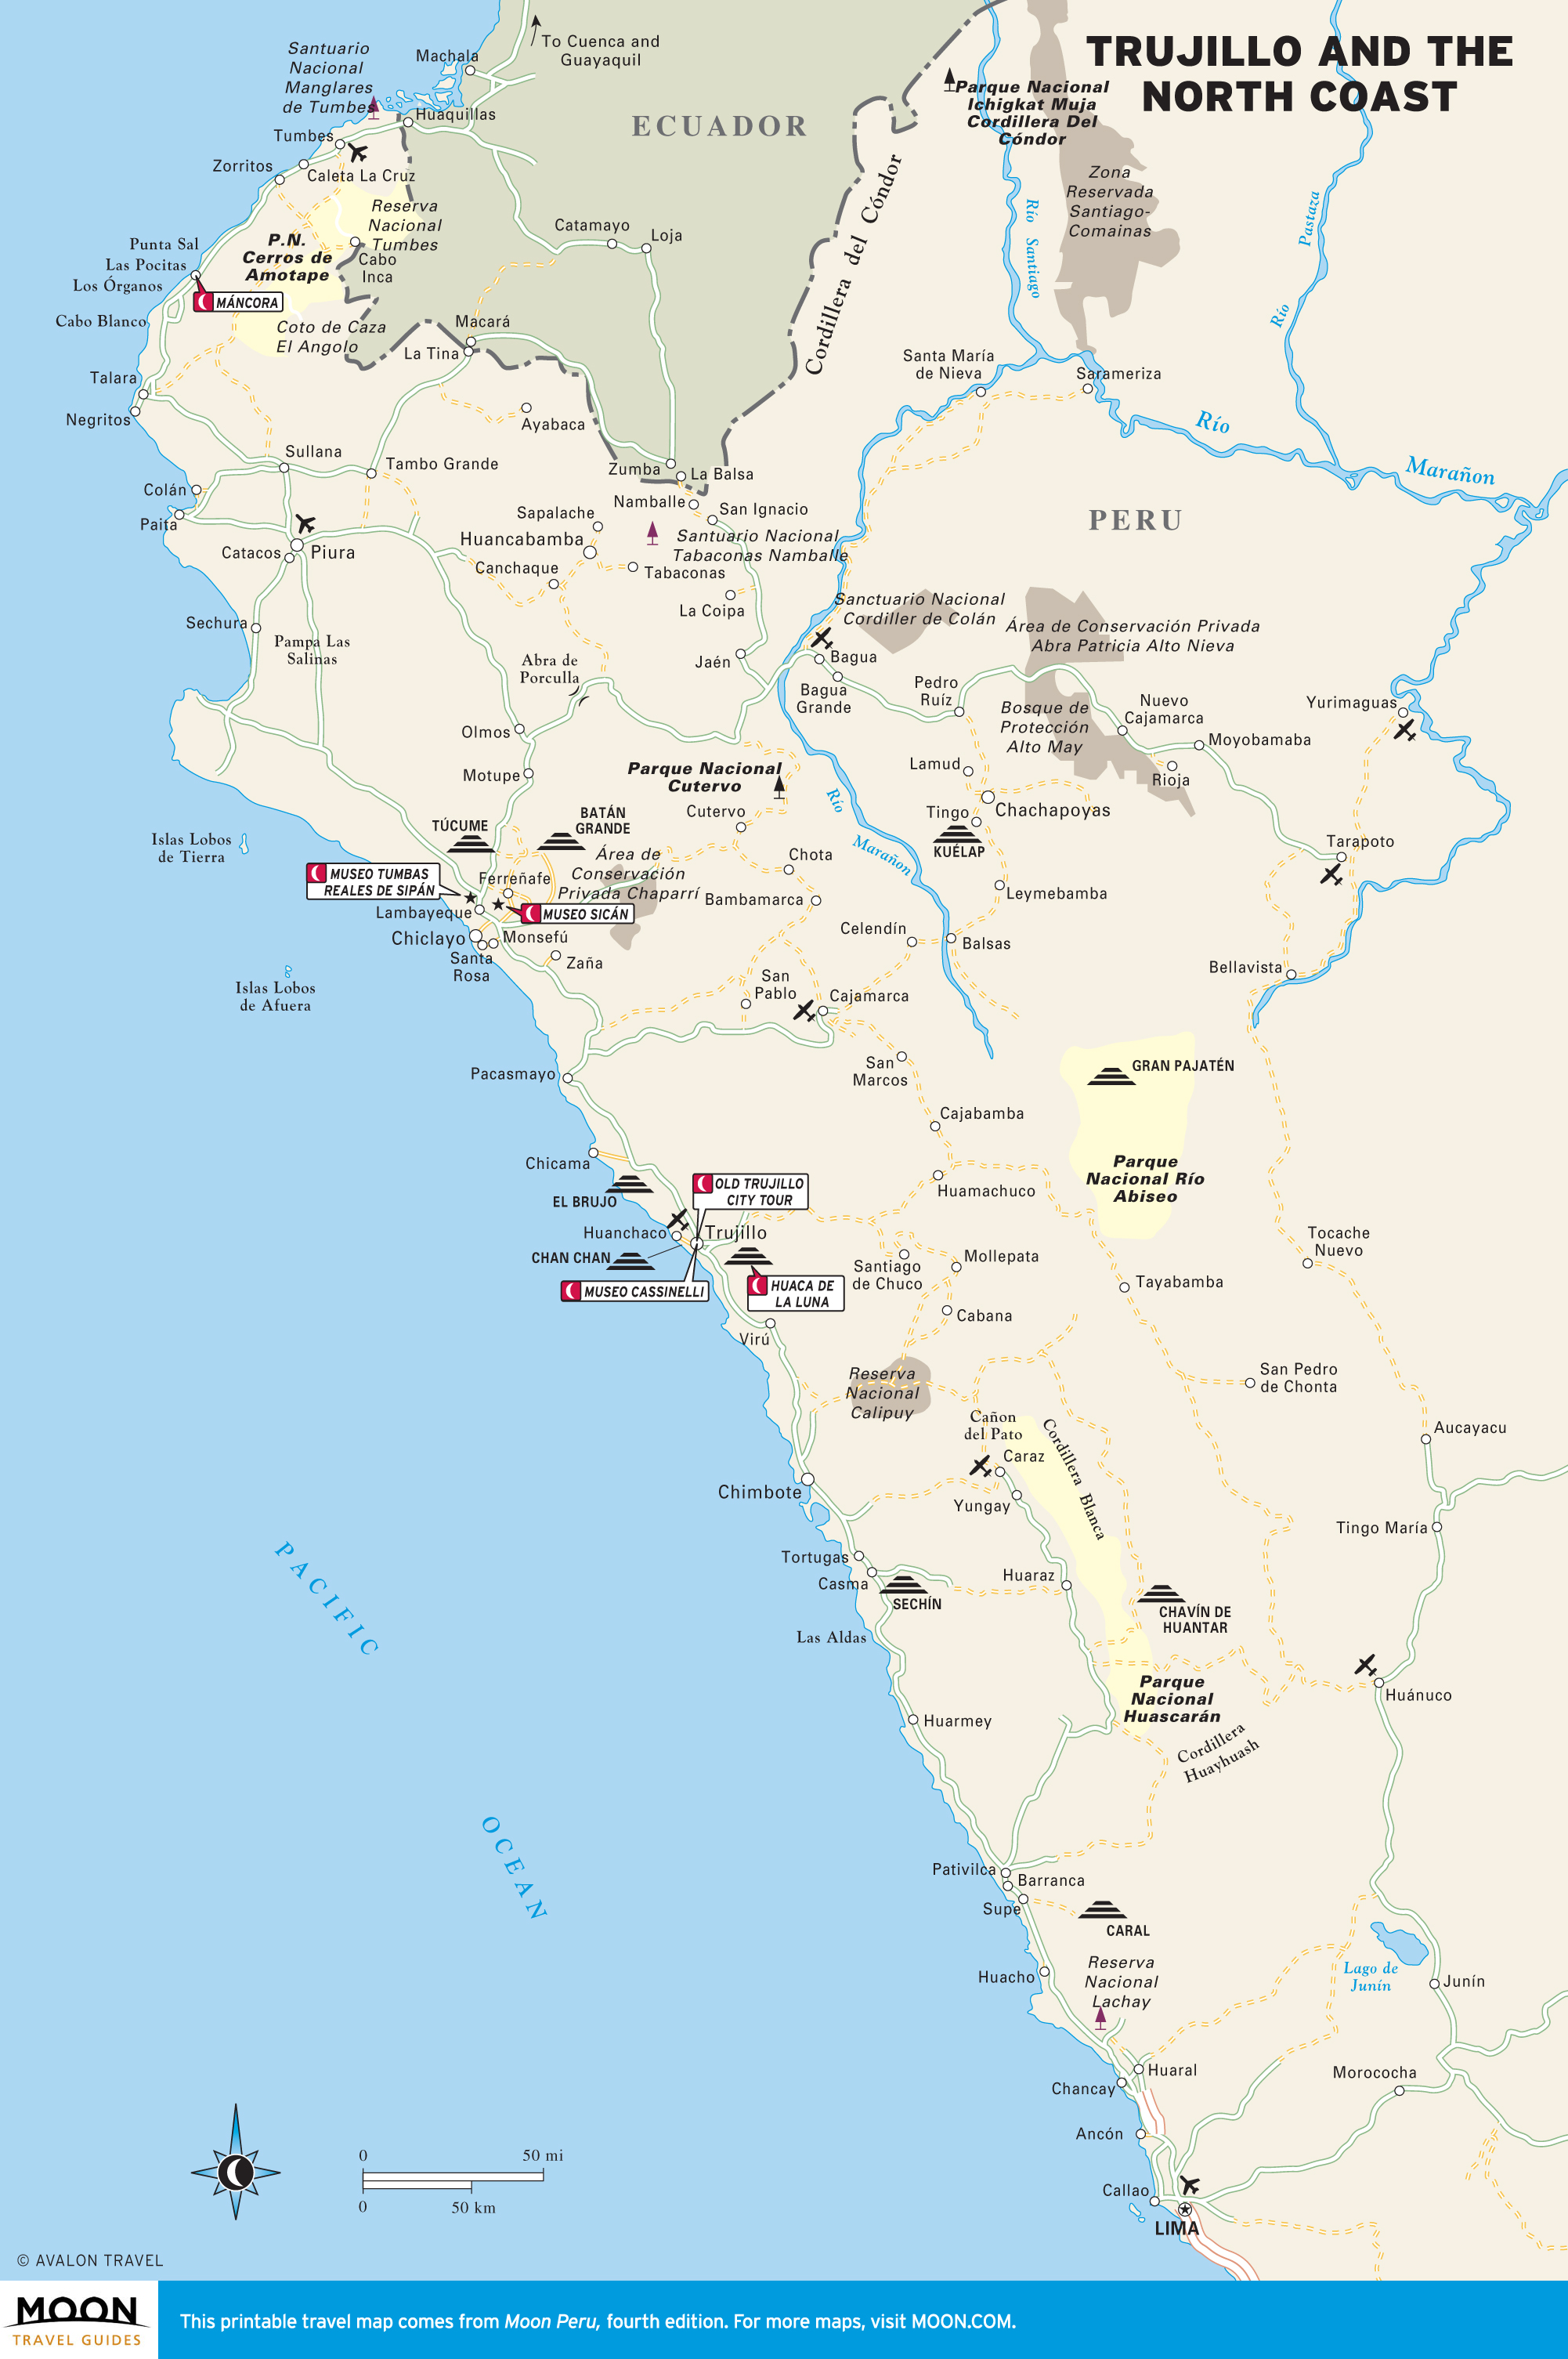 Color travel map of Trujillo and the North Coast of Peru